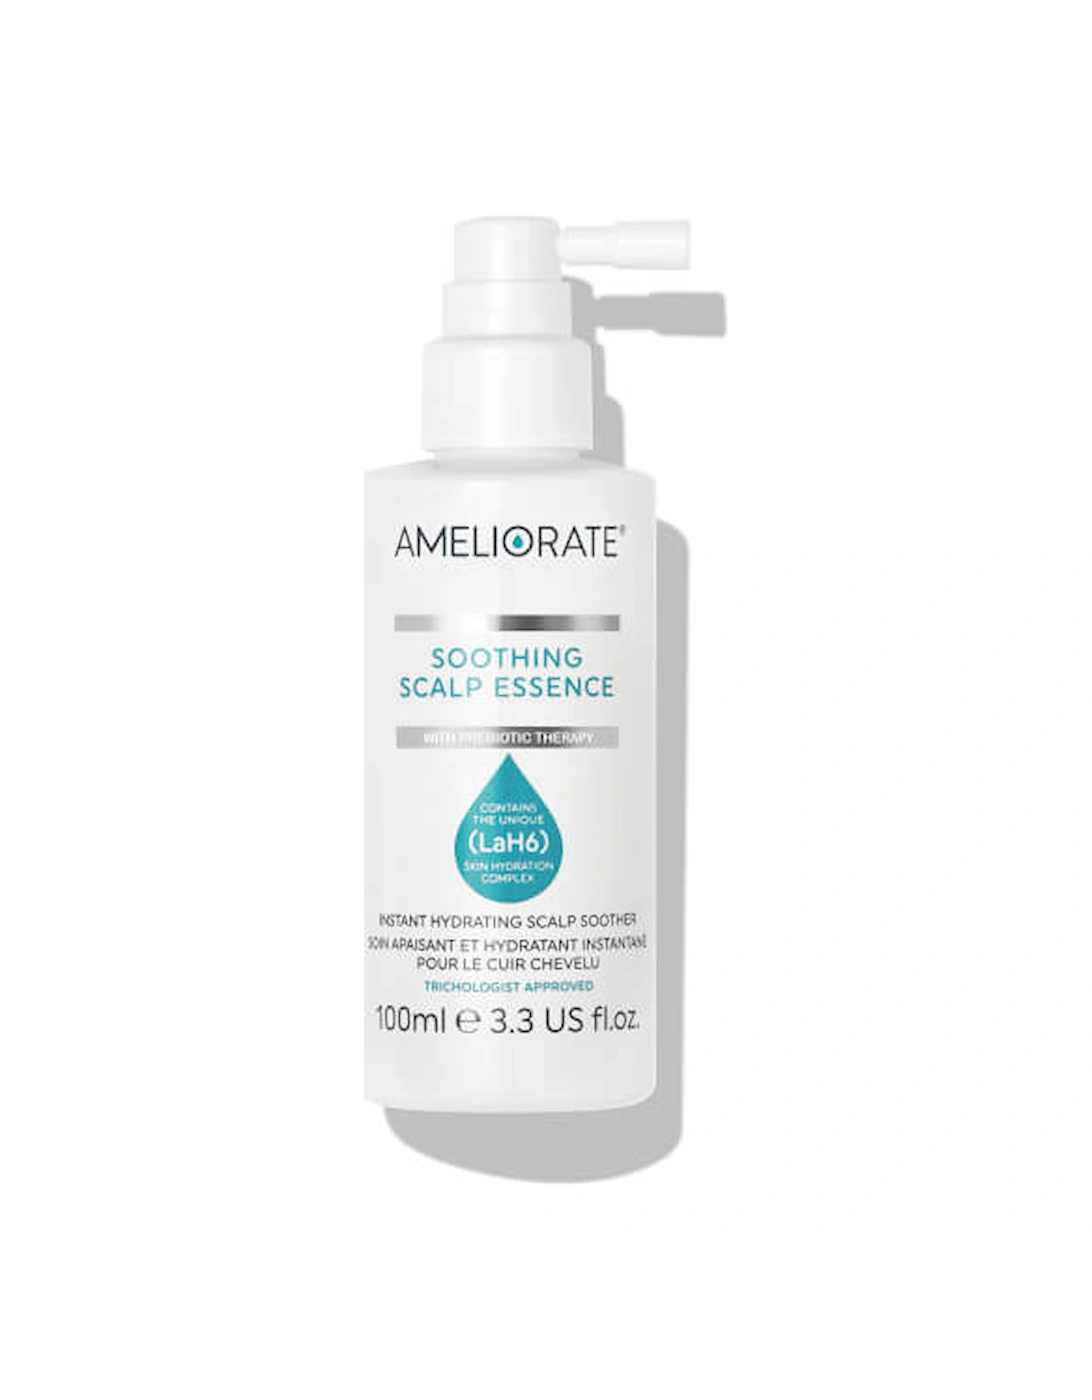 Soothing Scalp Essence 100ml - AMELIORATE, 2 of 1